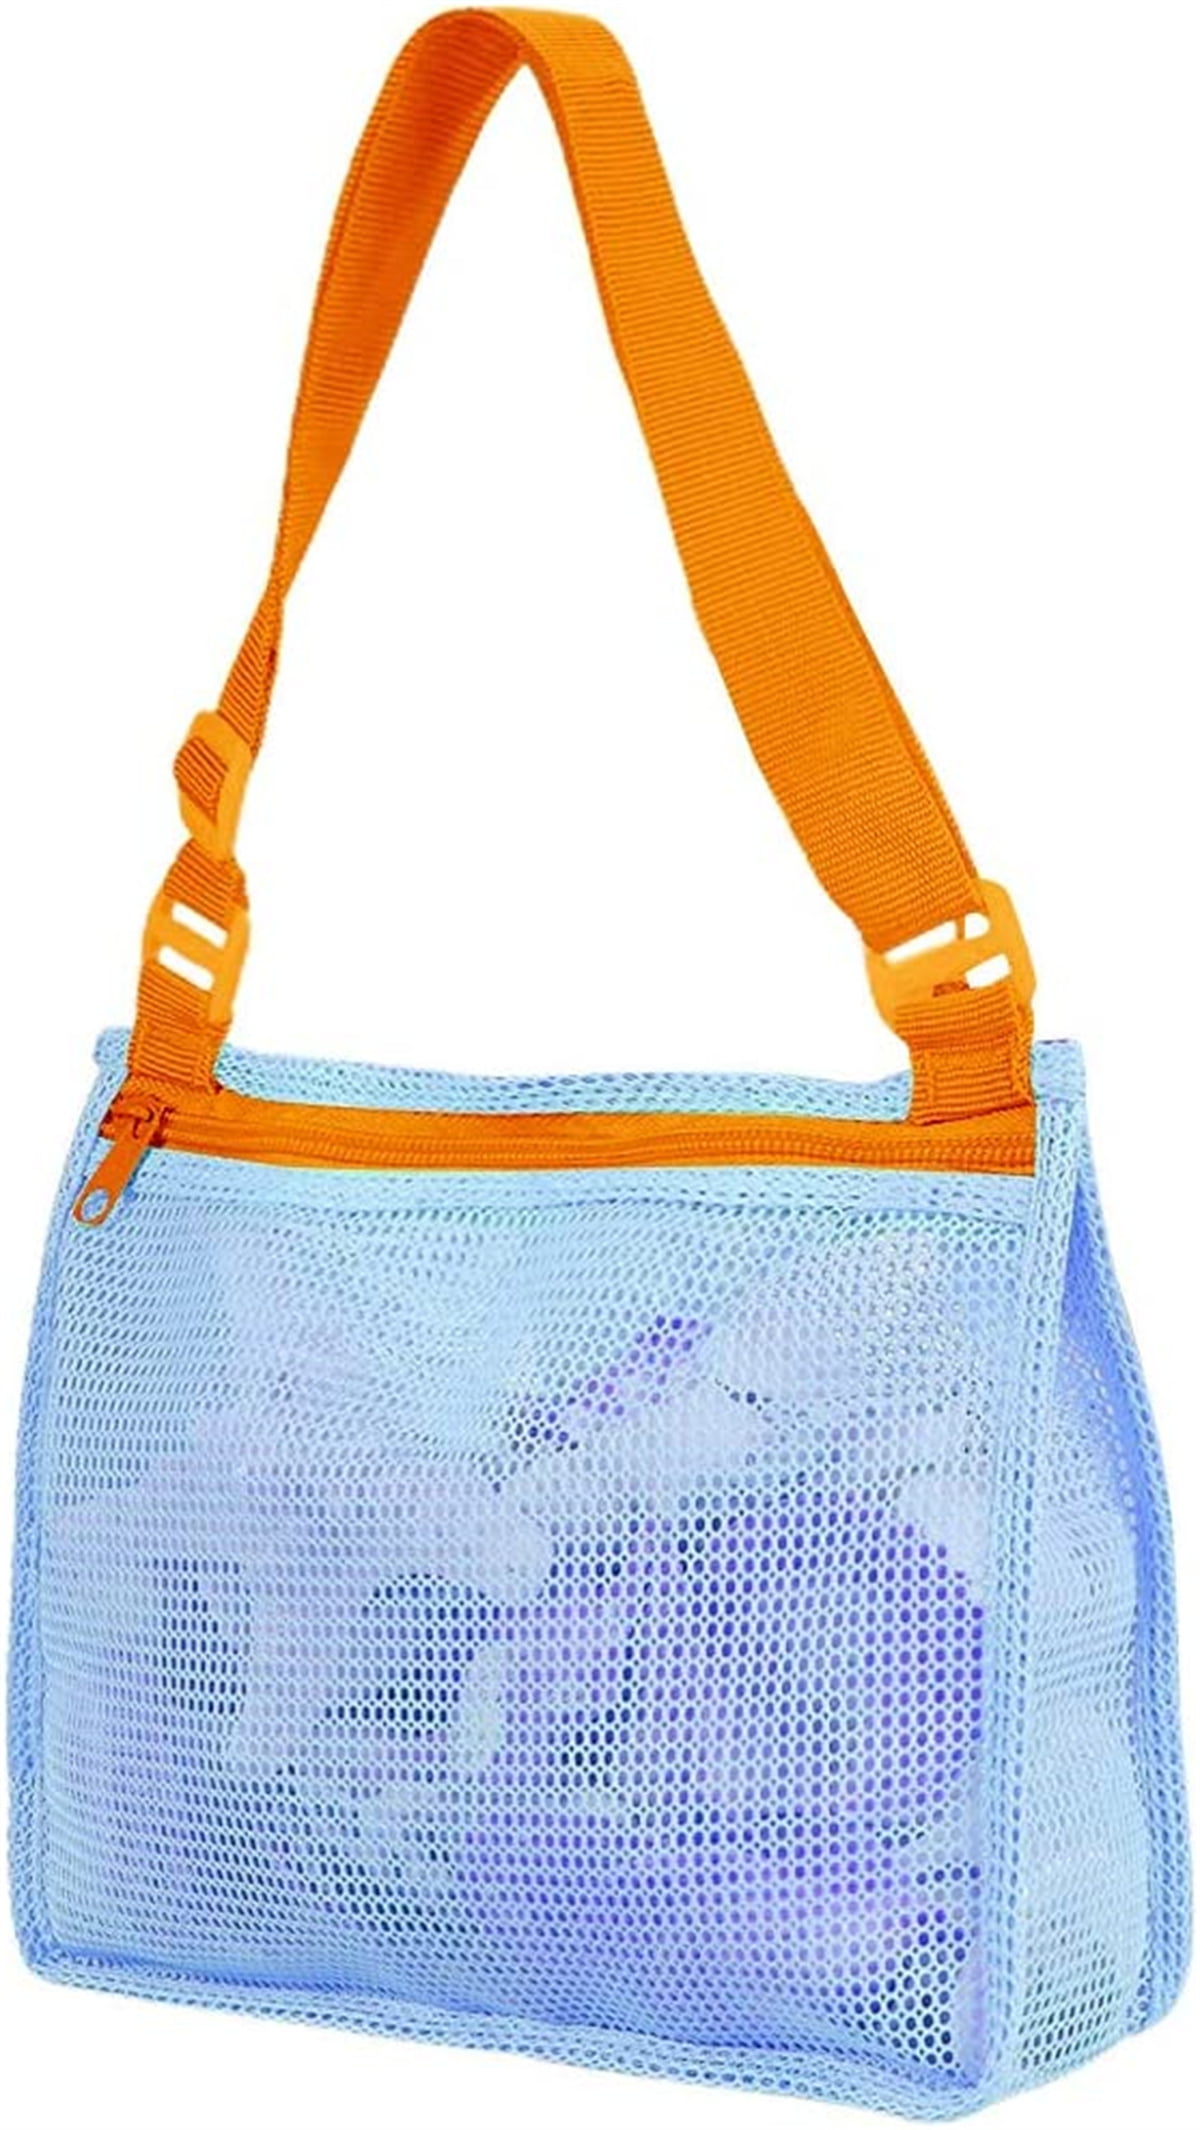 3 Pcs Beach Bag Shell Travel Accessories for Kids Mesh Organizer Bags Net  Sea The Daily Use Gifts Women Toys Miss